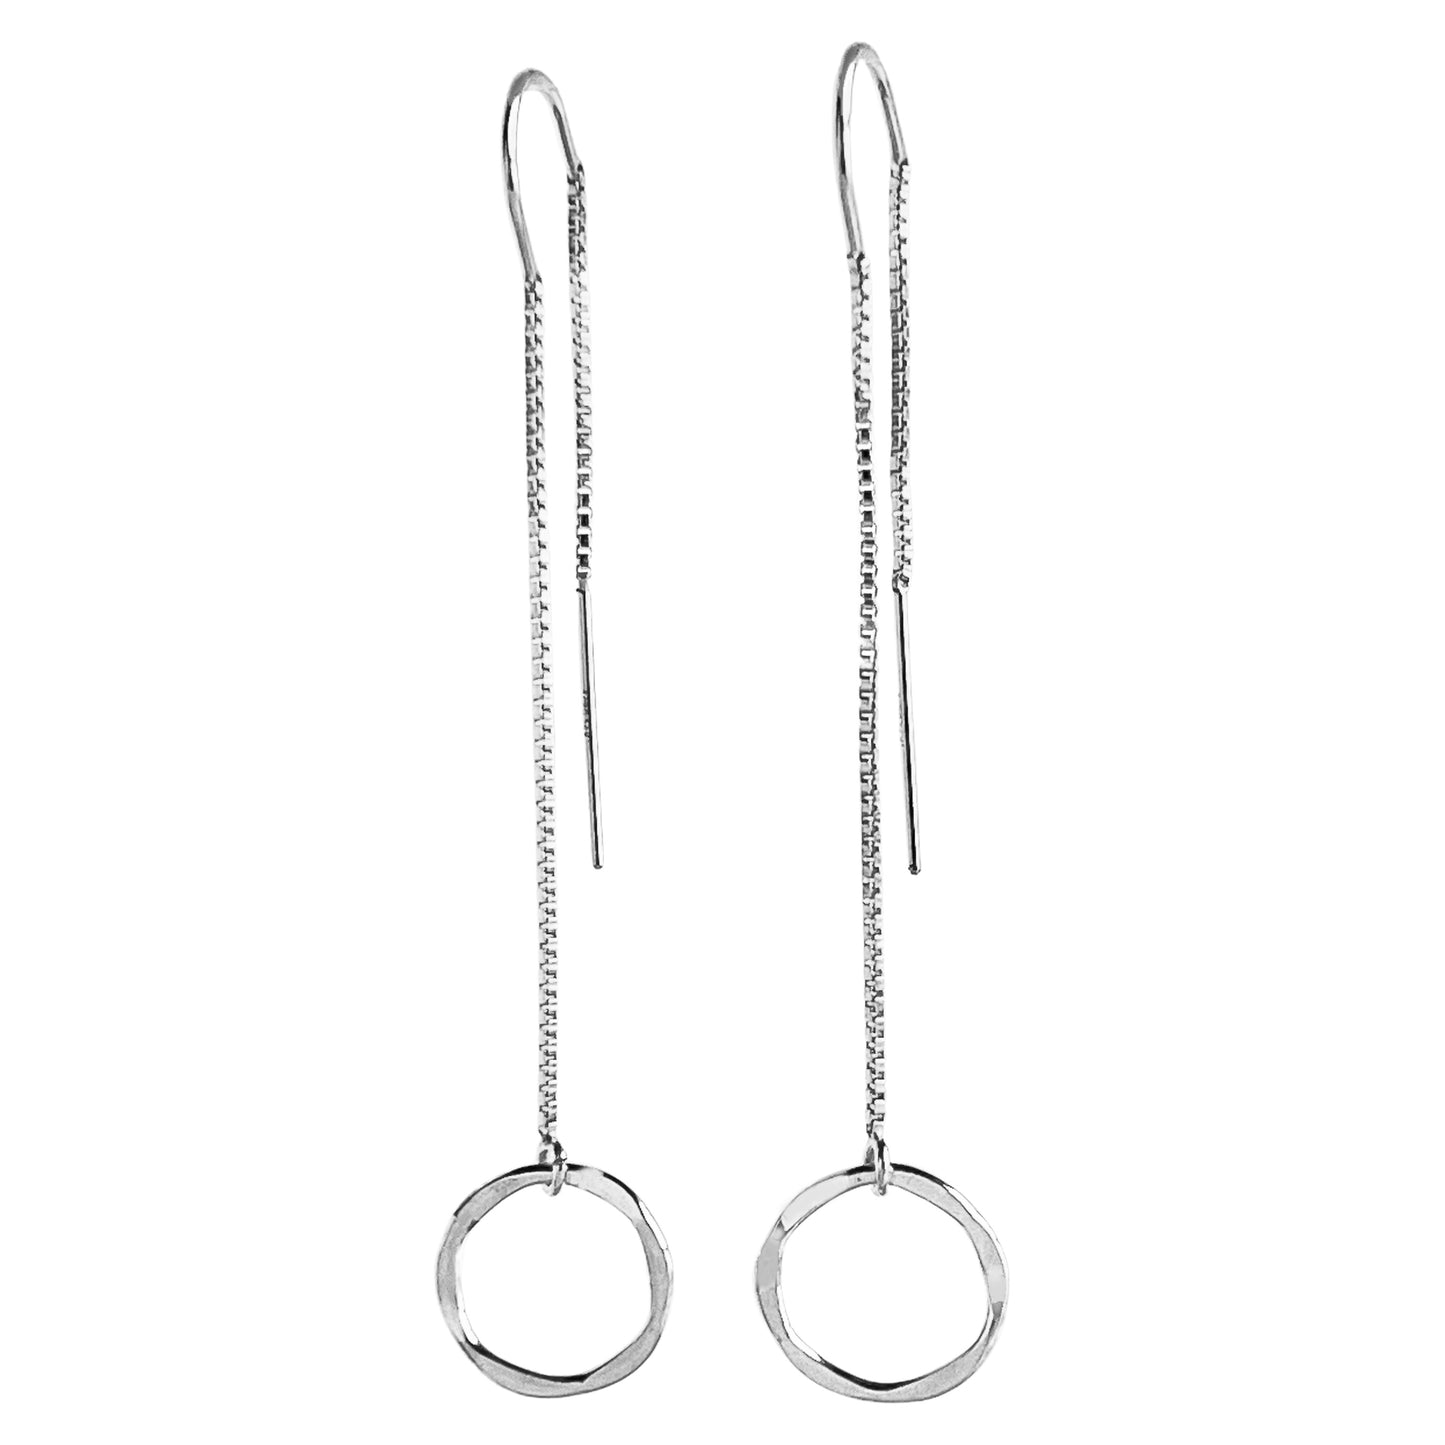 sterling silver threader earring with small hammered ring dangle in front box chain design with secure loop at the top